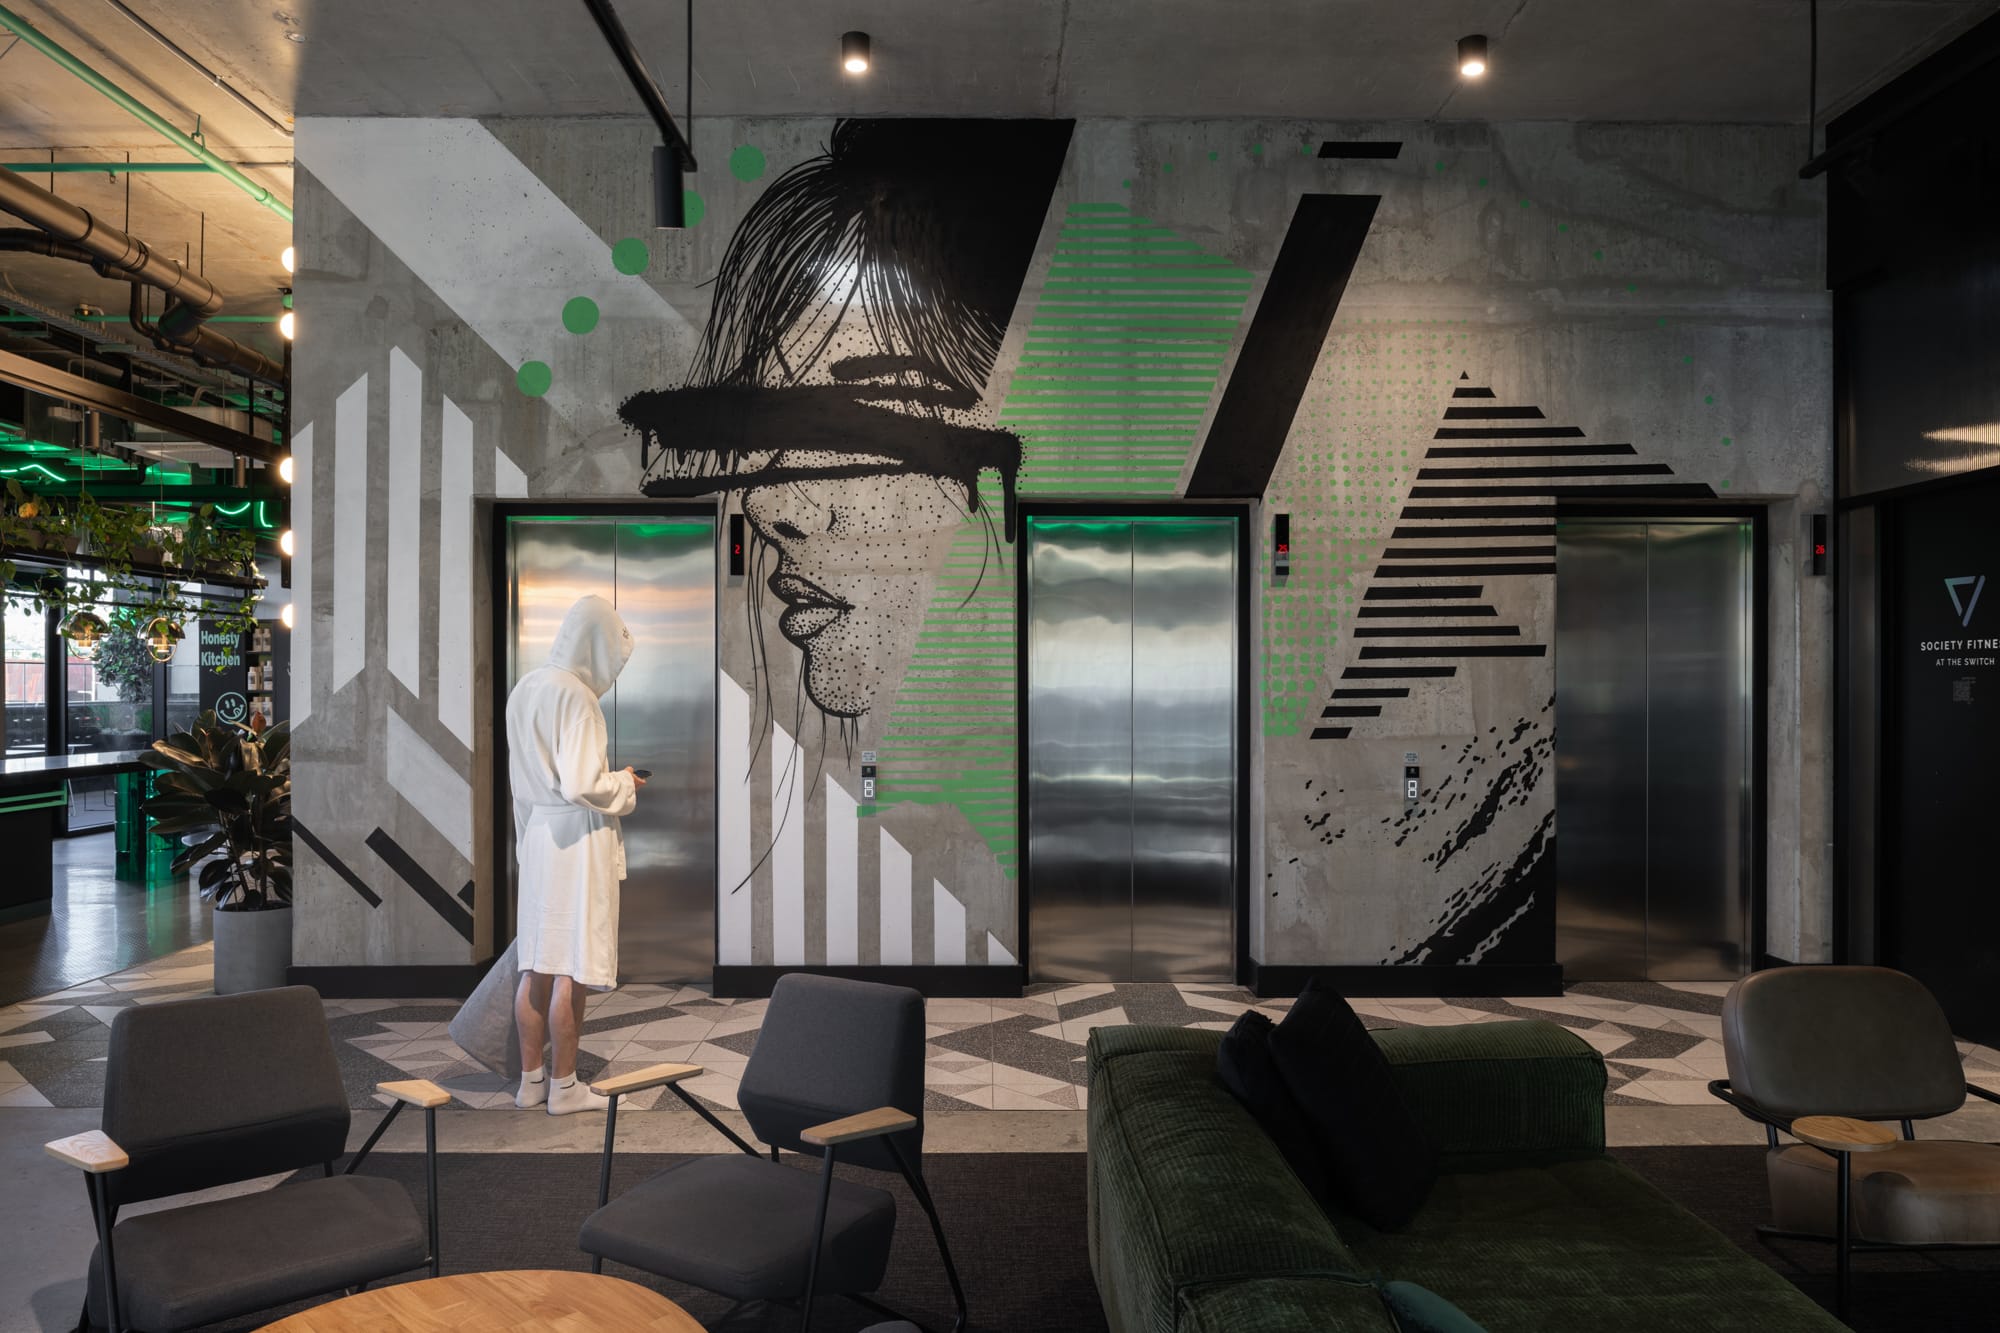 Thinking Differently About a Home Gives You Affordable ChoicesA modern building lobby with concrete floors and a large wall mural of a woman's face. A figure in a white robe stands looking at the mural, and plush green seating areas are scattered throughout the space.